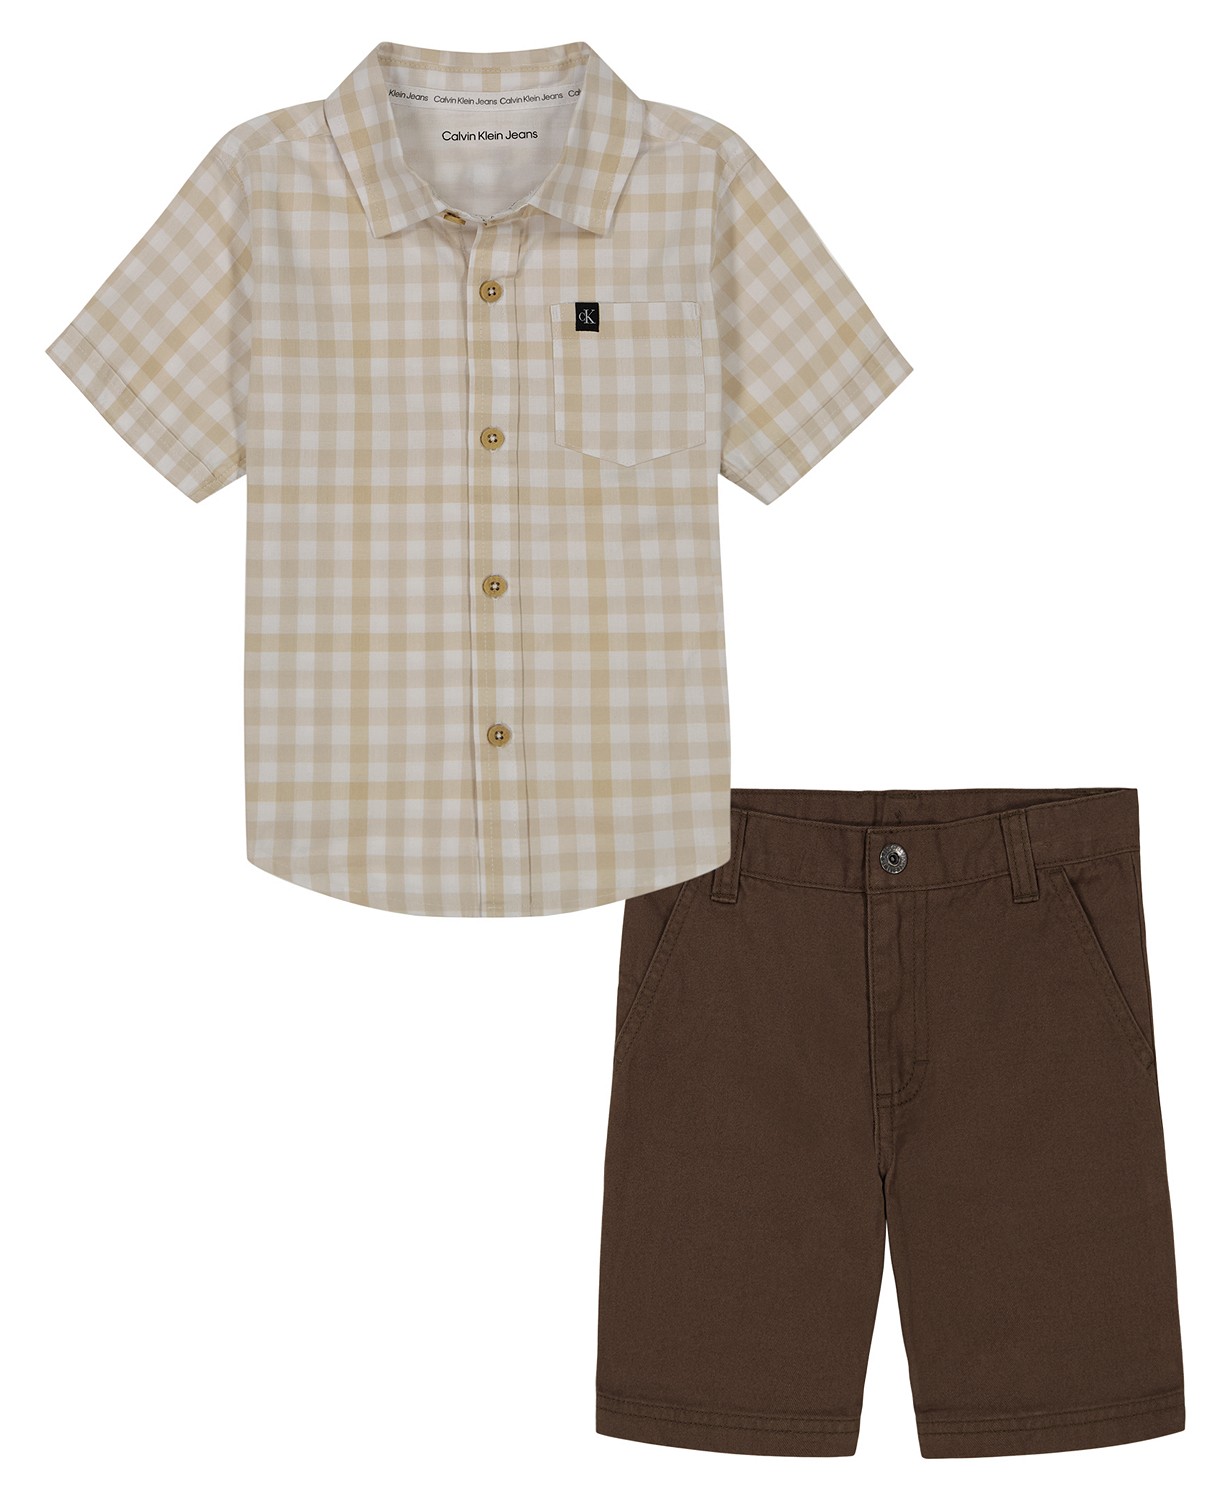  Toddler Boys Plaid Short Sleeve Button-Up Shirt and Twill Shorts 2 Piece Set